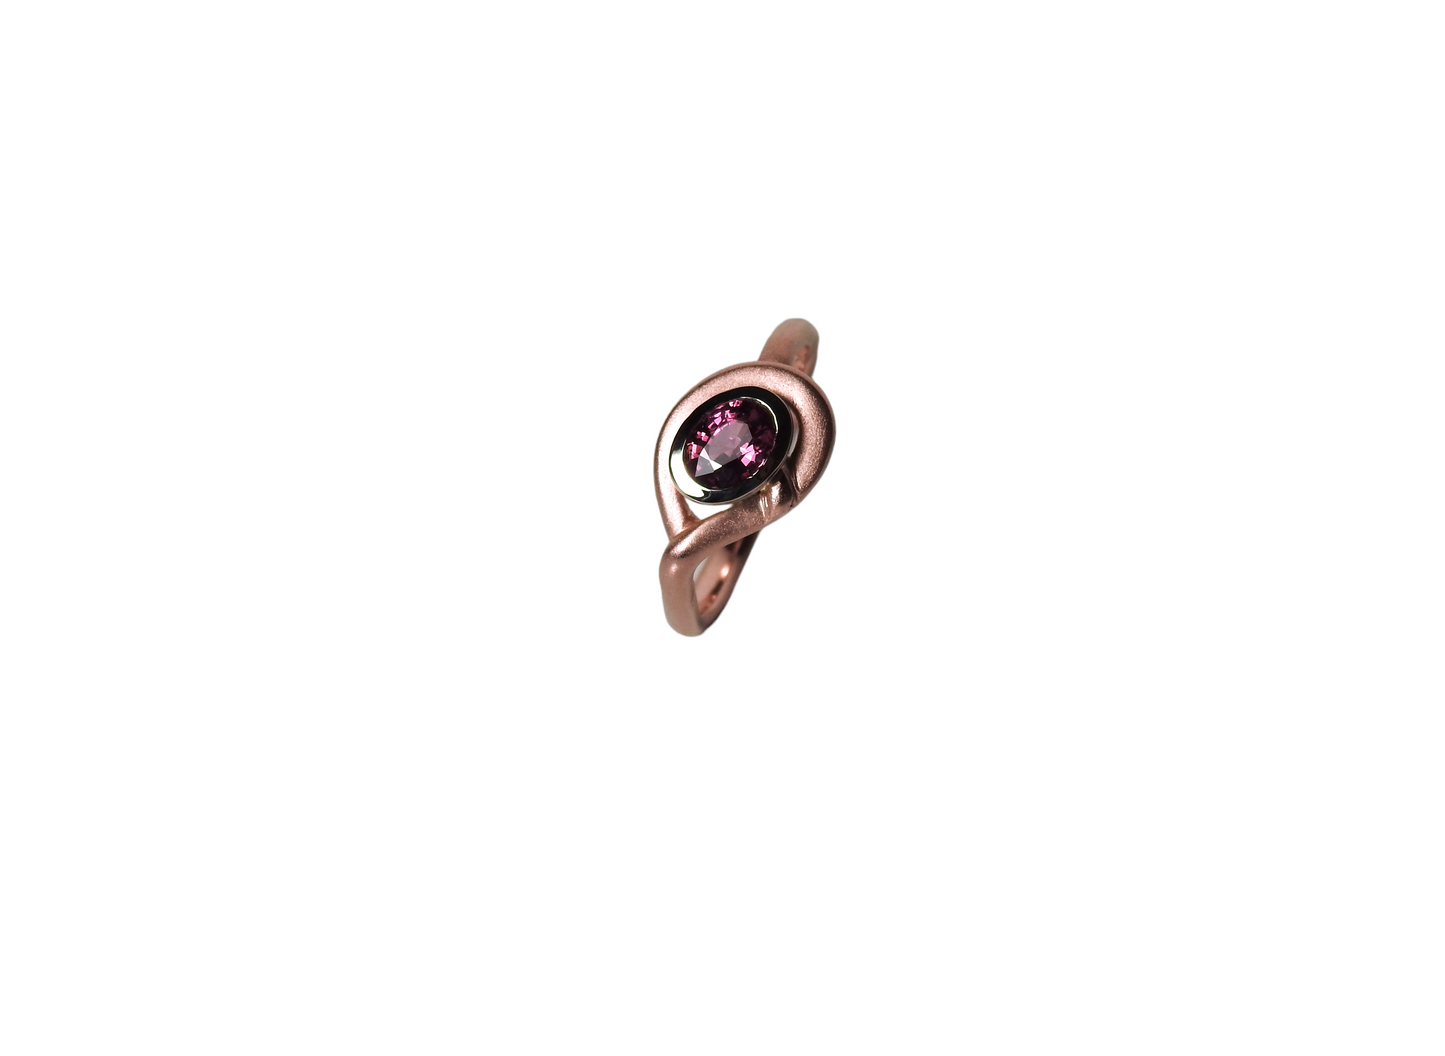 Soft red gold rounded ring, wrapping around a heavy white gold bezel, set with a glowing oval ruby, by ZEALmetal, Nicole Horlor, in Kingston, ON Canada